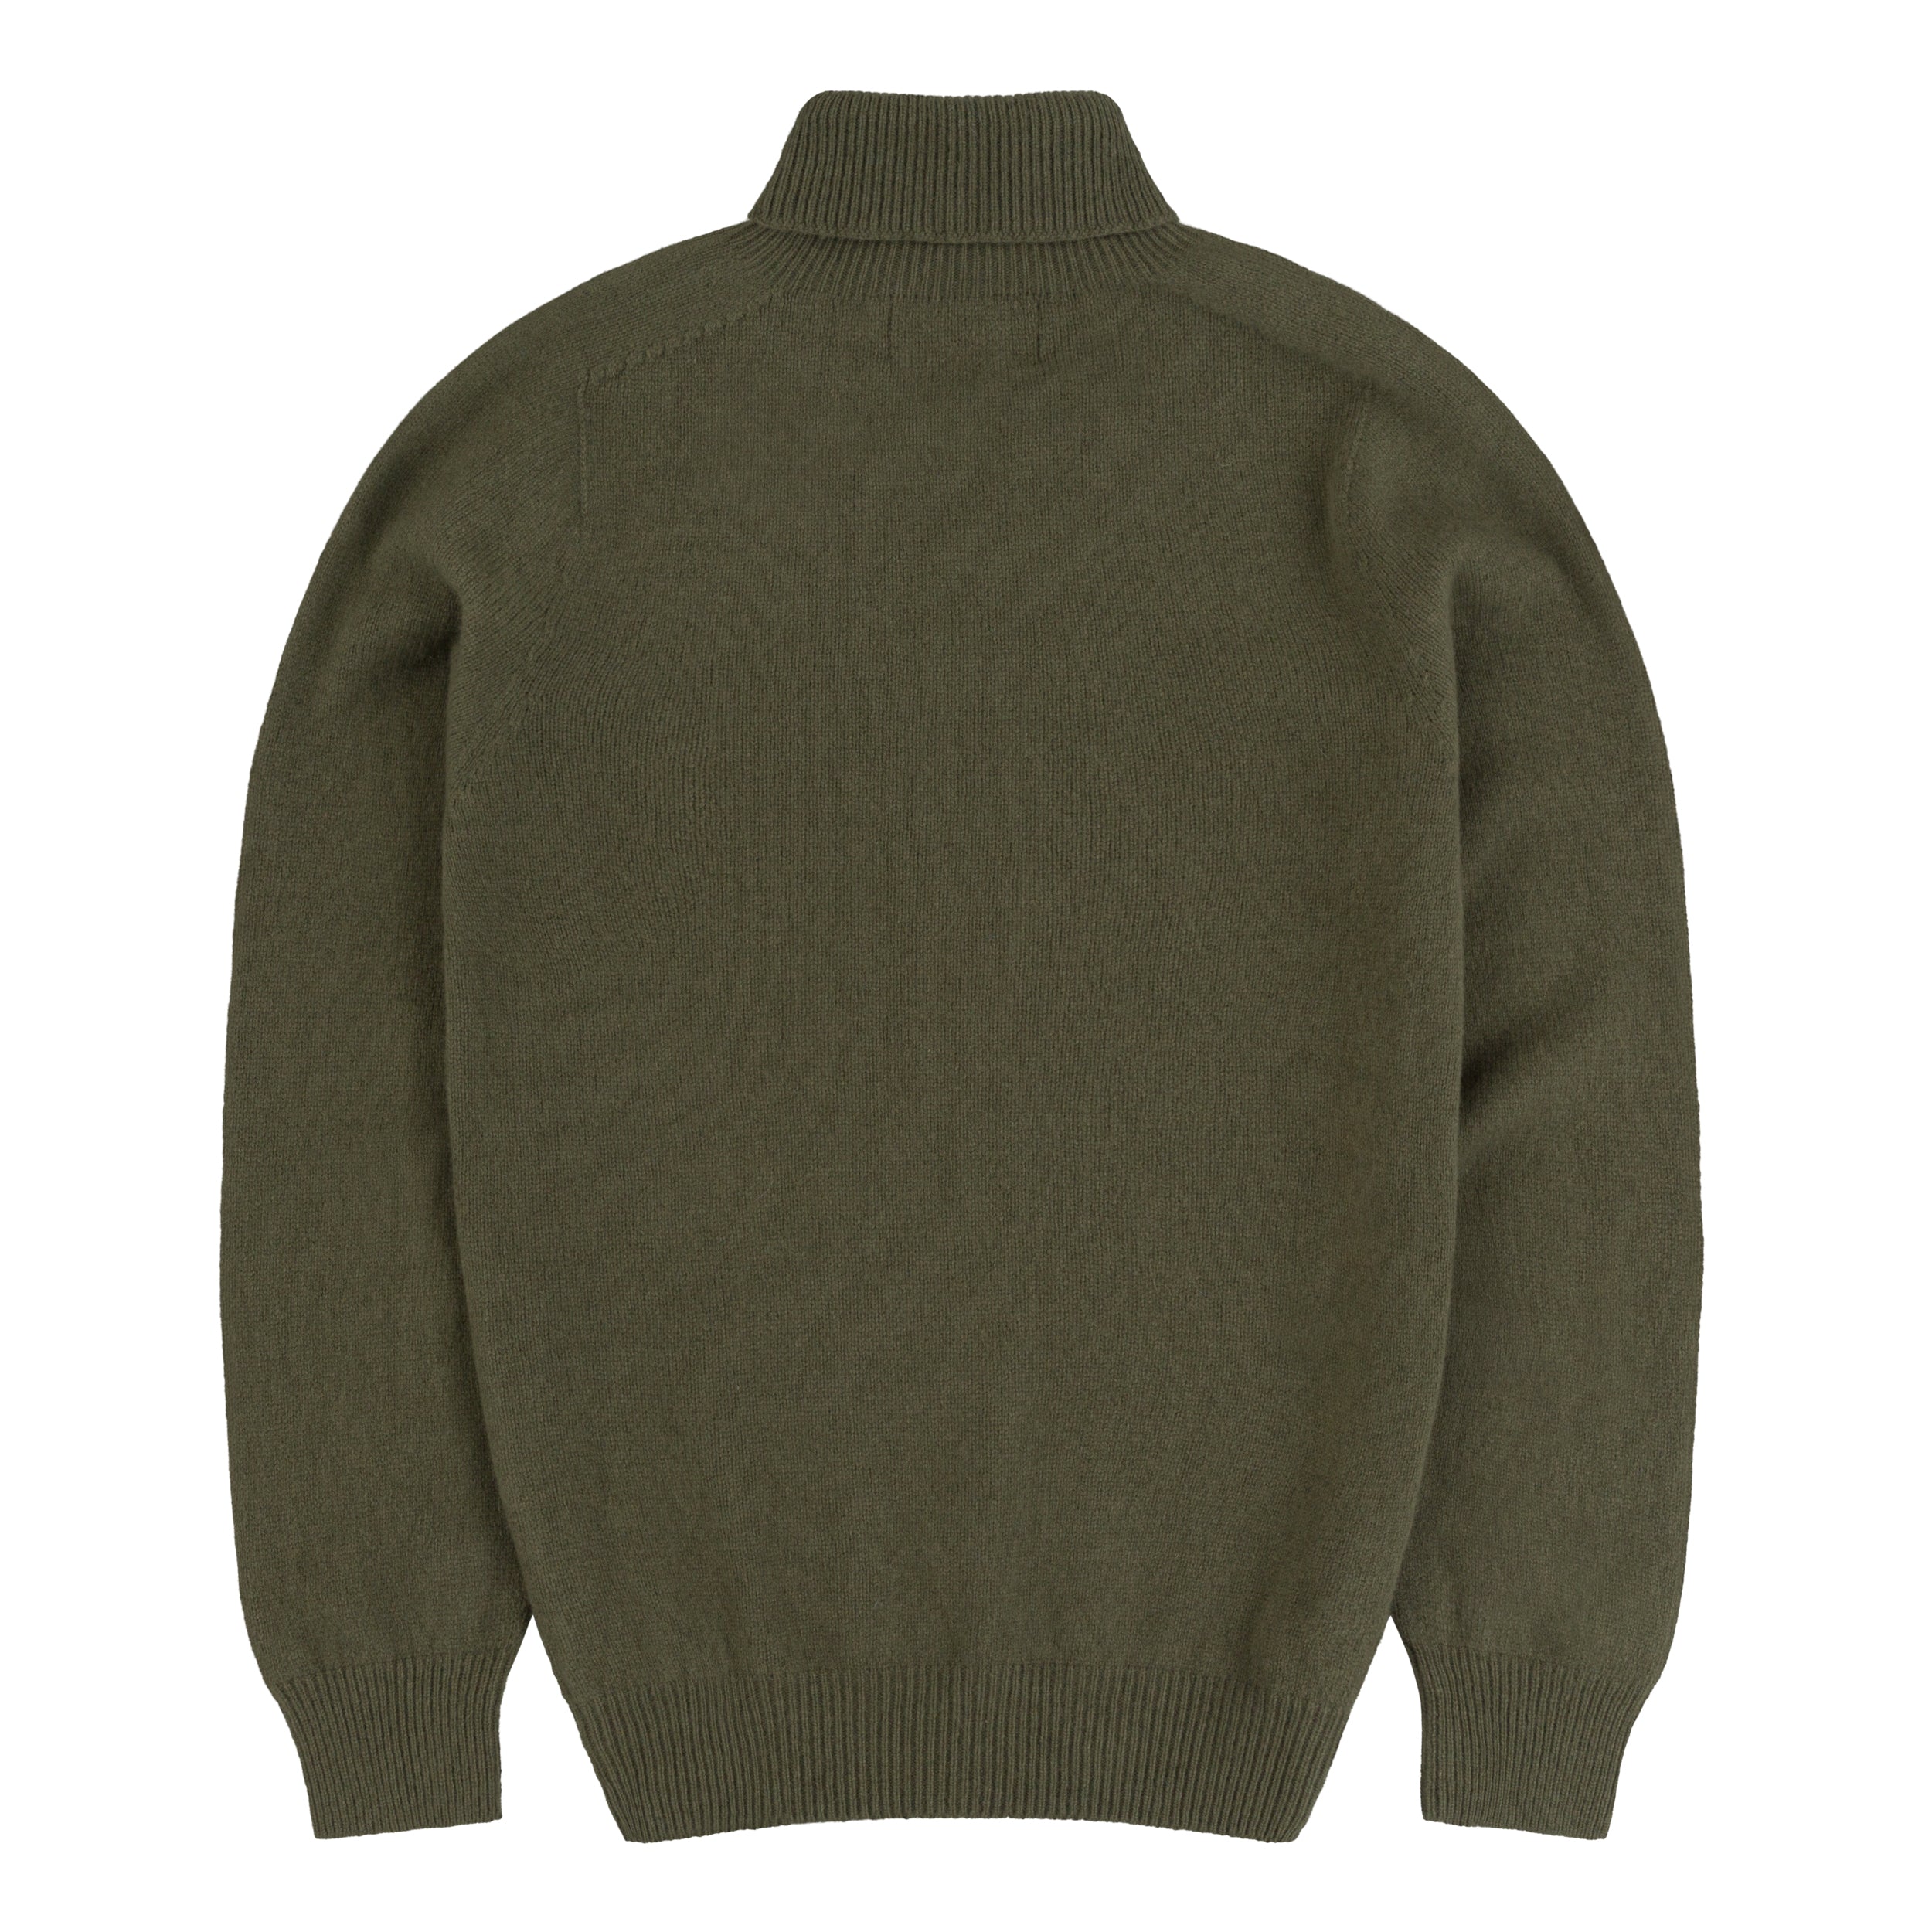 Hand wash with wool detergent, reshape whilst damp, iron inside out.Carrier Company Hand Cashmere and Merino Supersoft Roll Neck Jumper in Olive